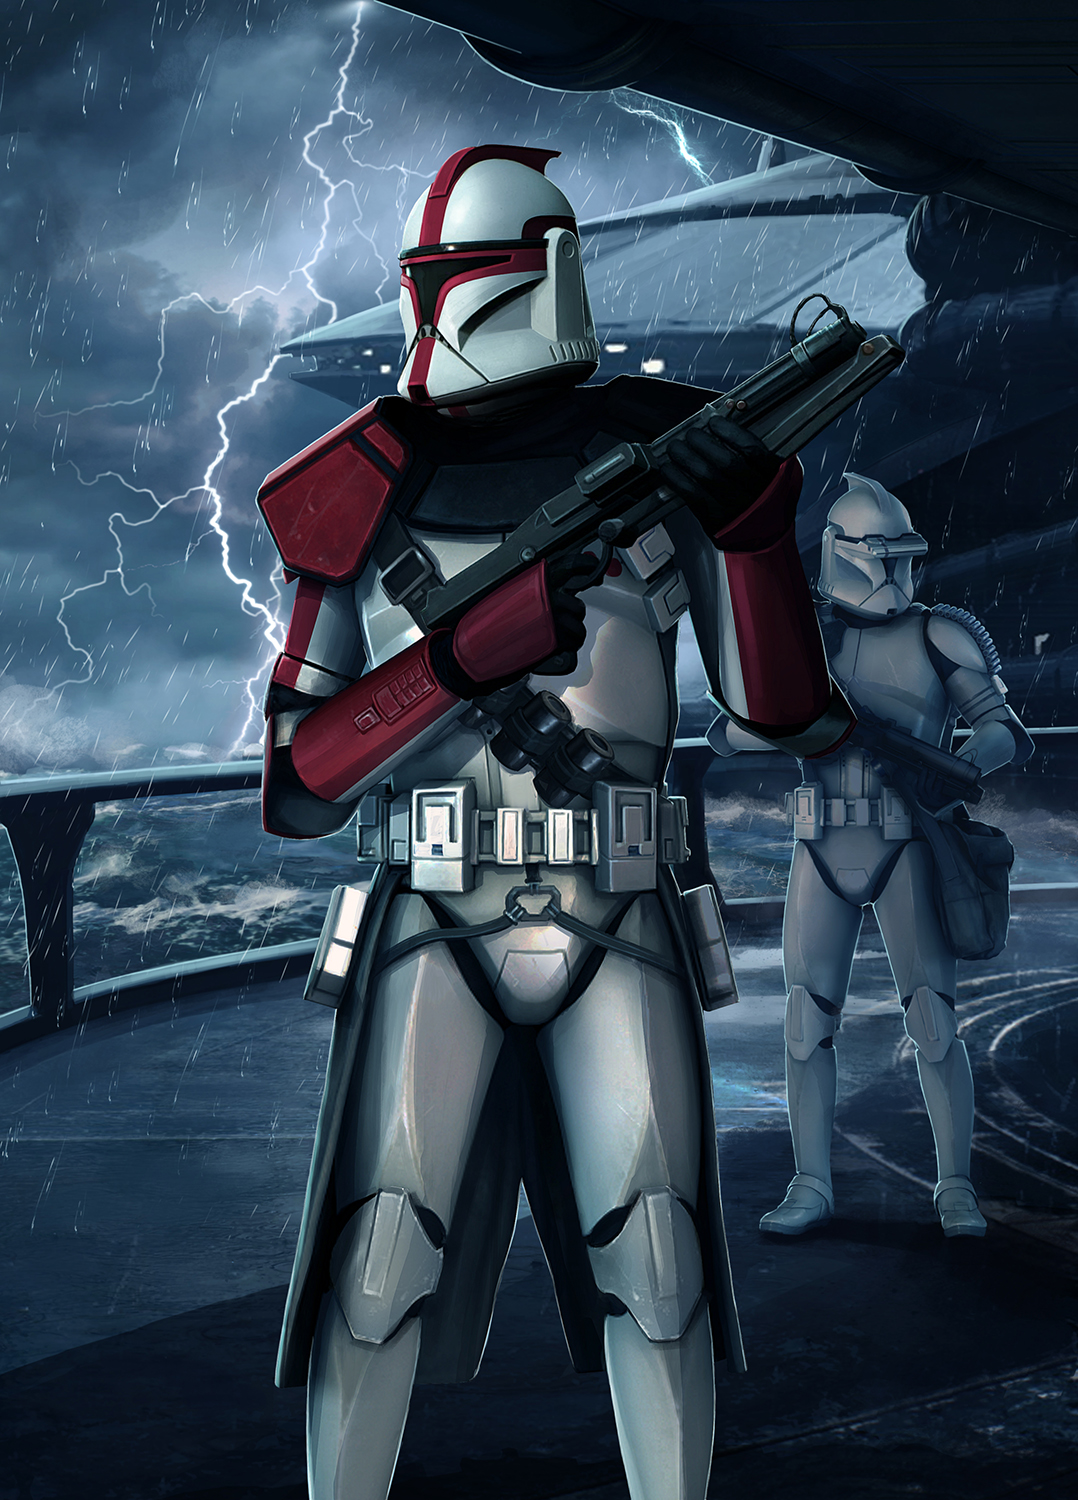 phase 1 clone troopers